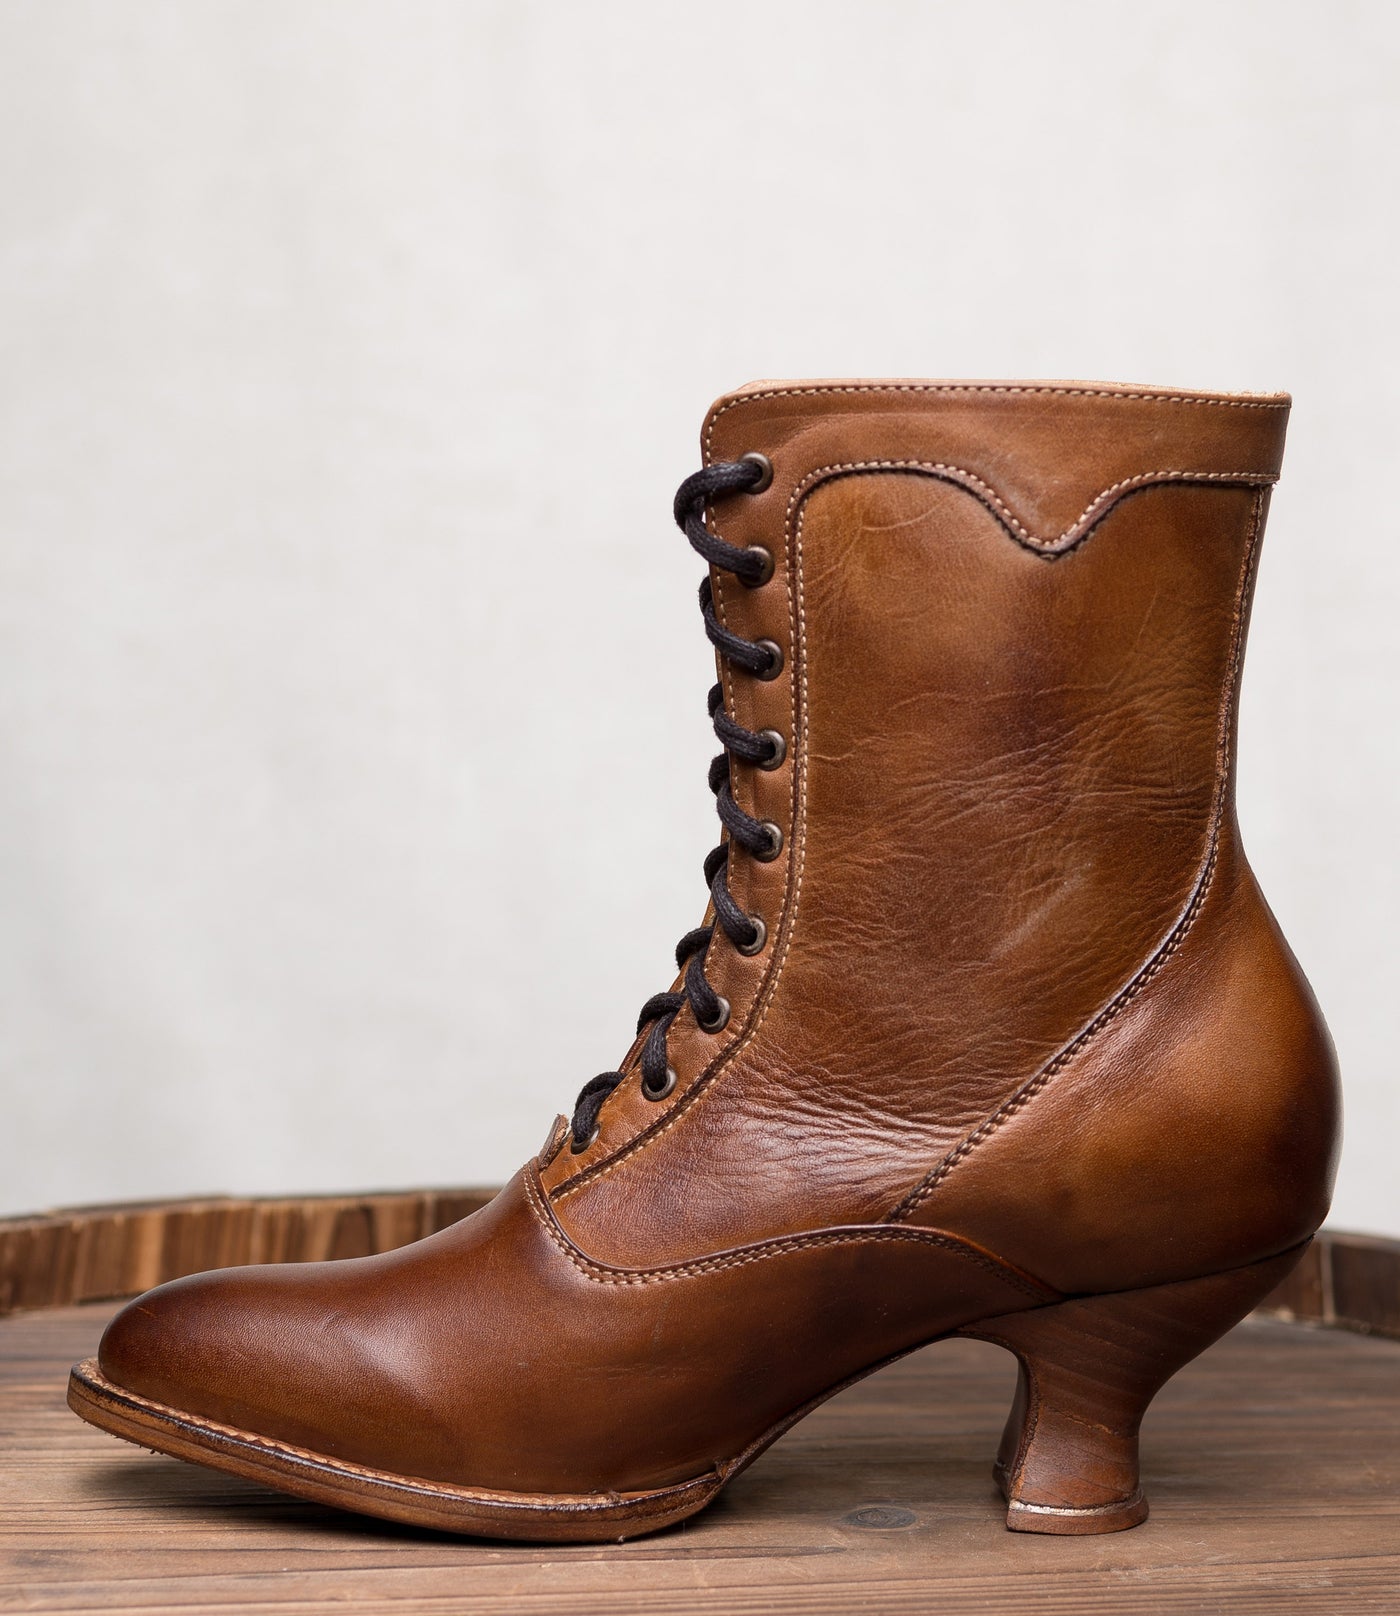 Victorian Inspired Leather Ankle Boots in Tan Rustic - SOLD OUT